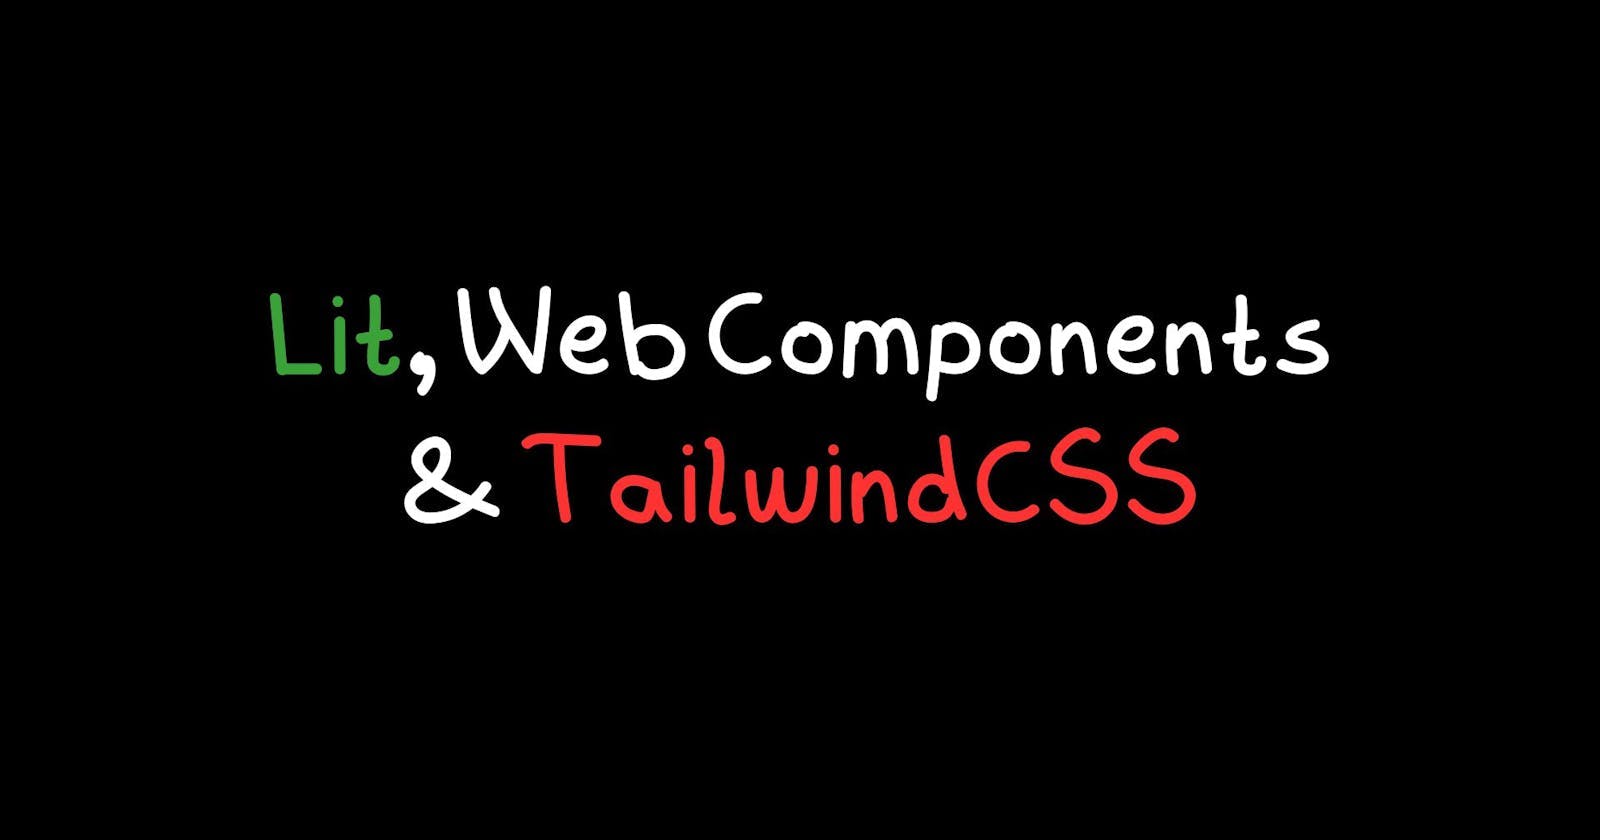 Lit, Web Components & TailwindCSS (Day 5) - Creating a SaaS Startup in 30 Days